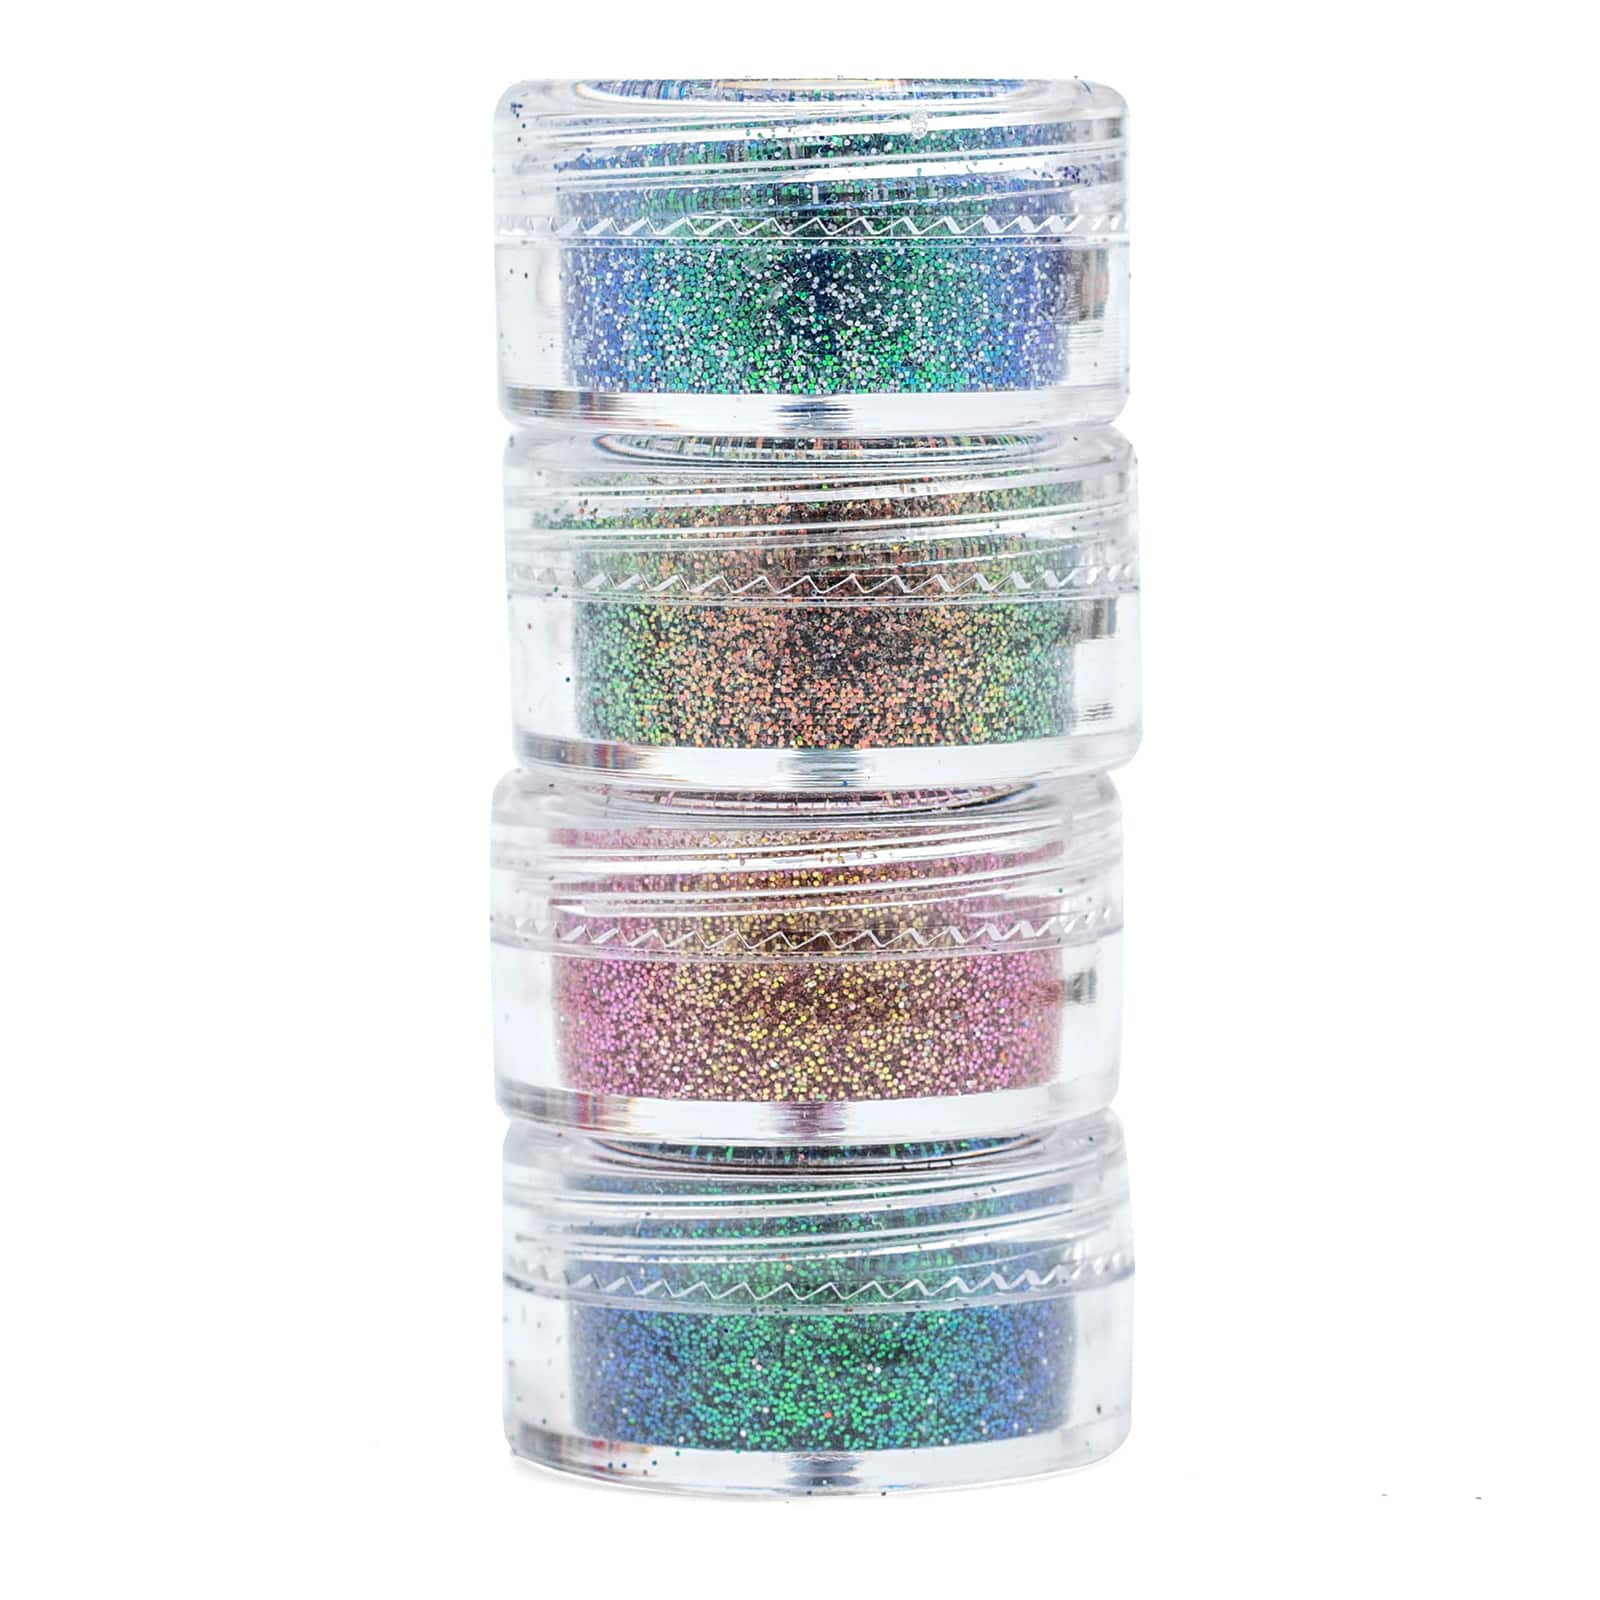 American Crafts&#x2122; Color Pour Resin Color Changing Glitter